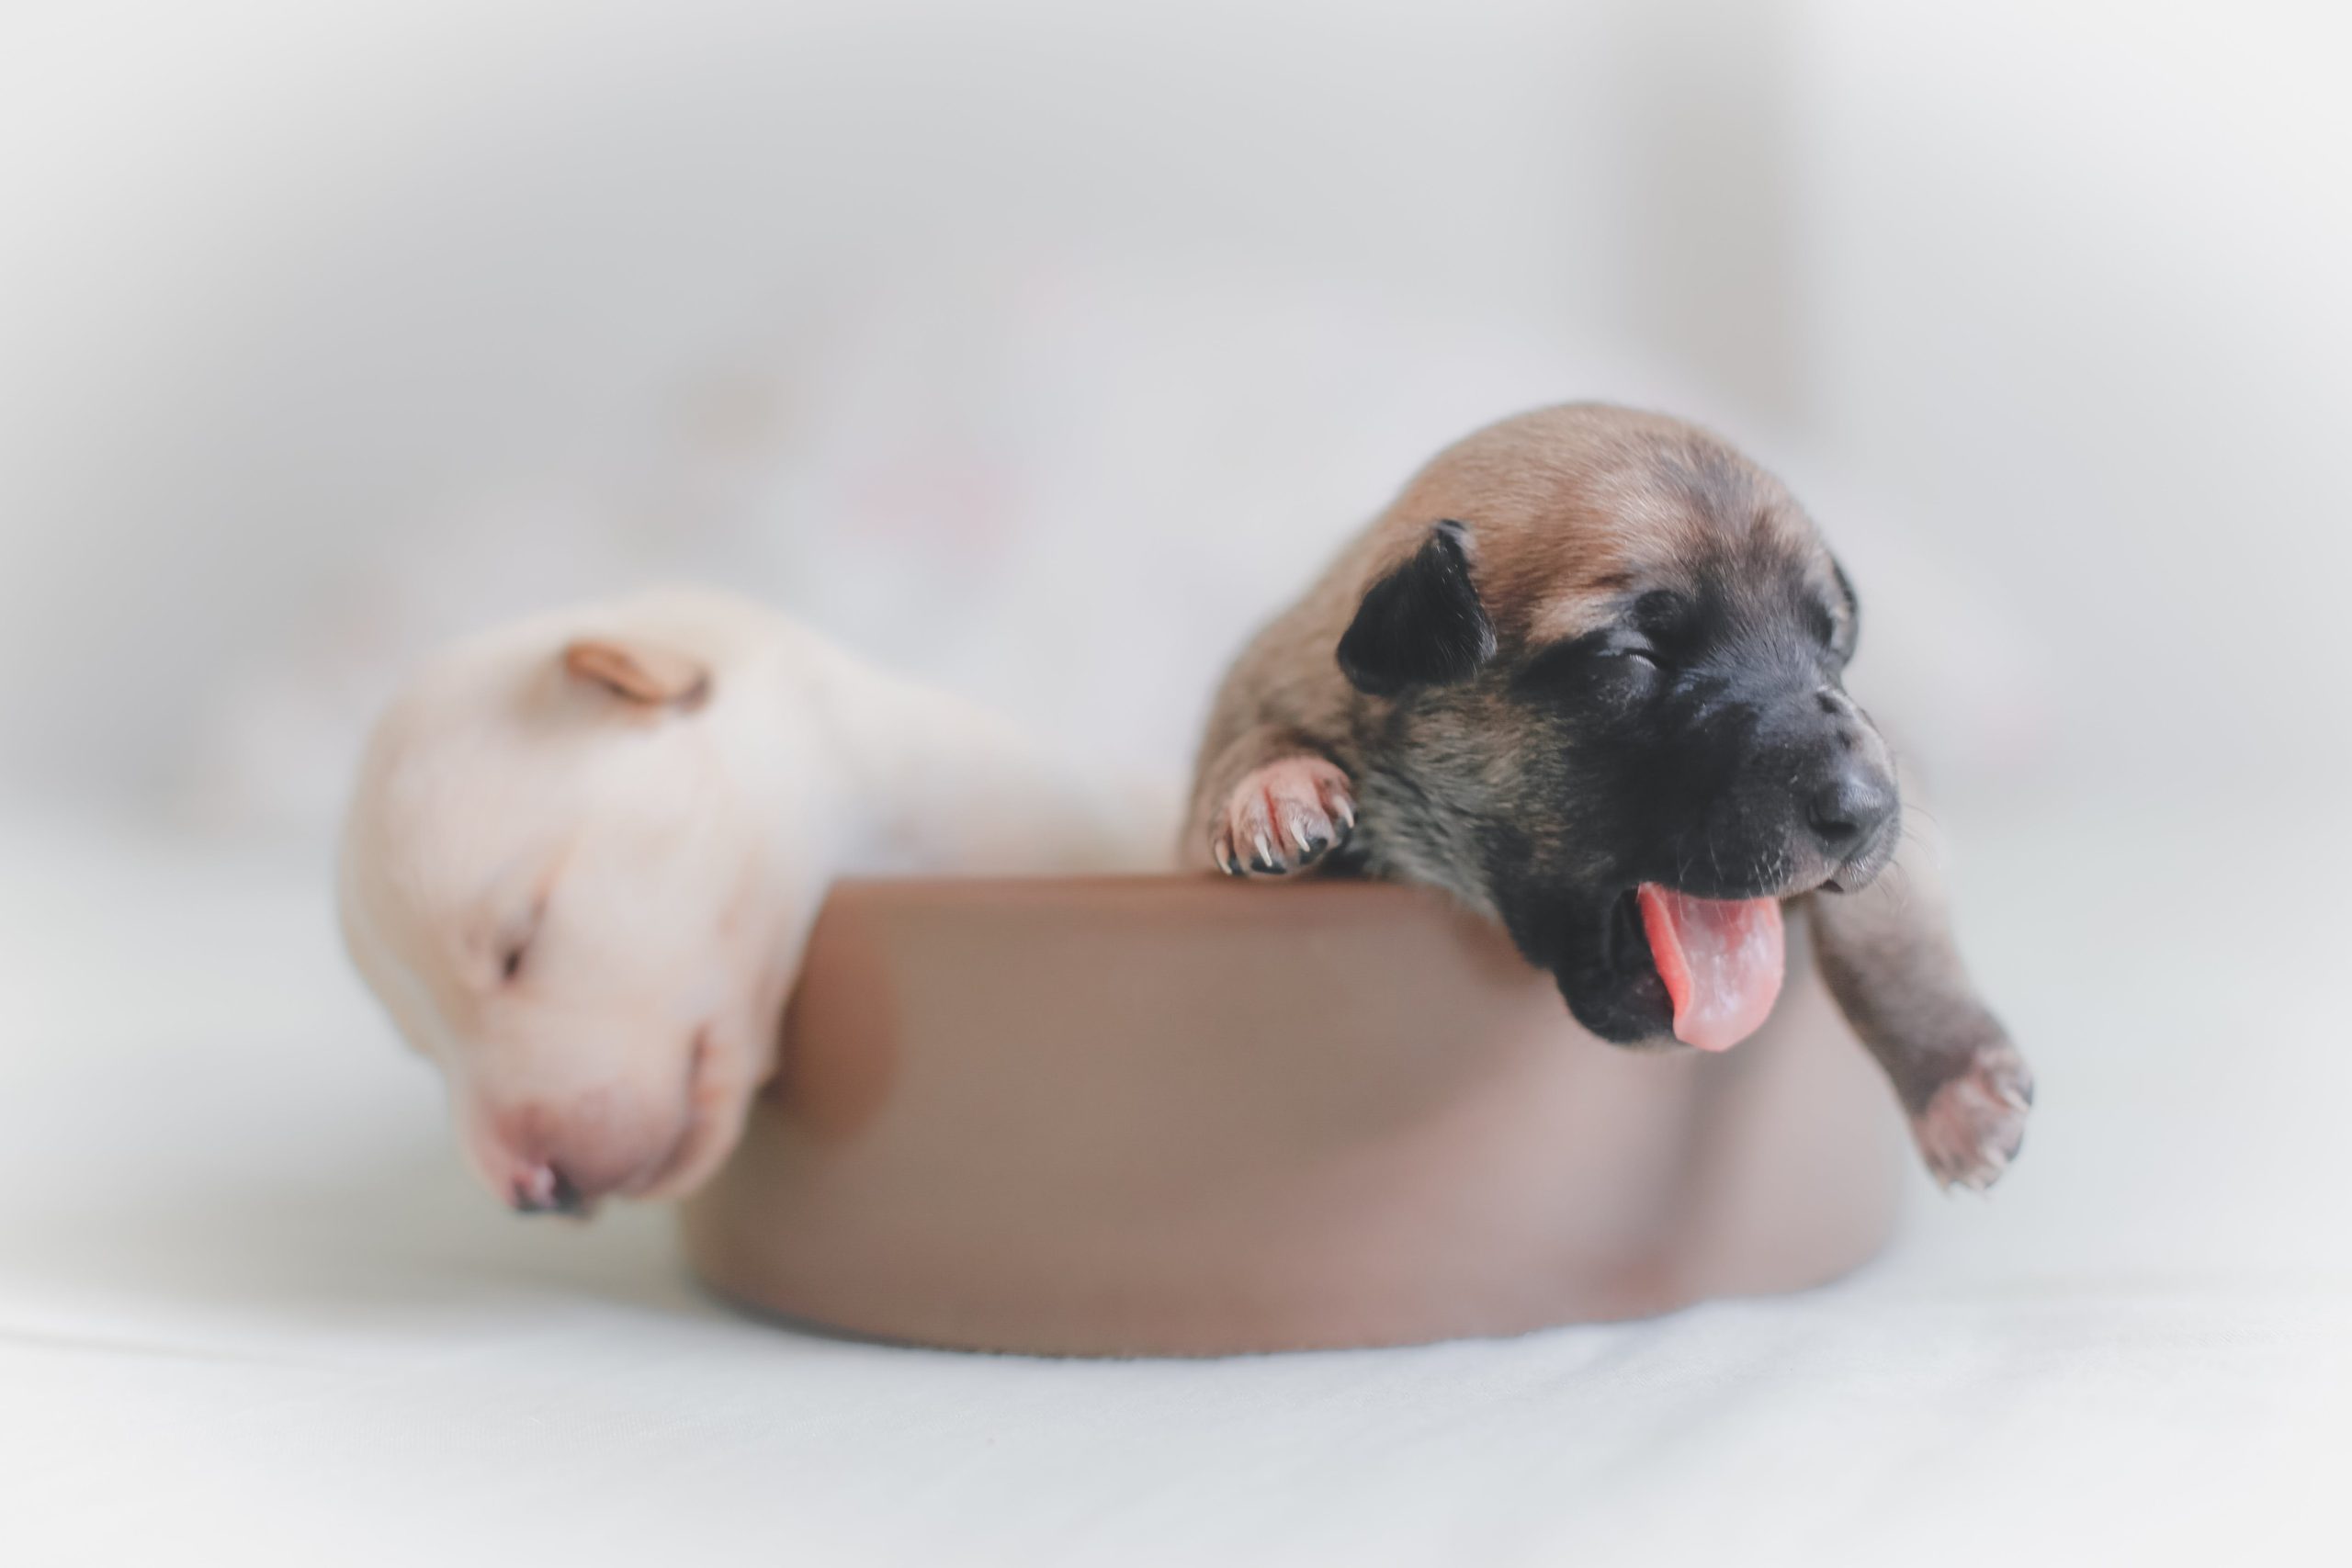 Buying a puppy: What do you need to know before getting it?